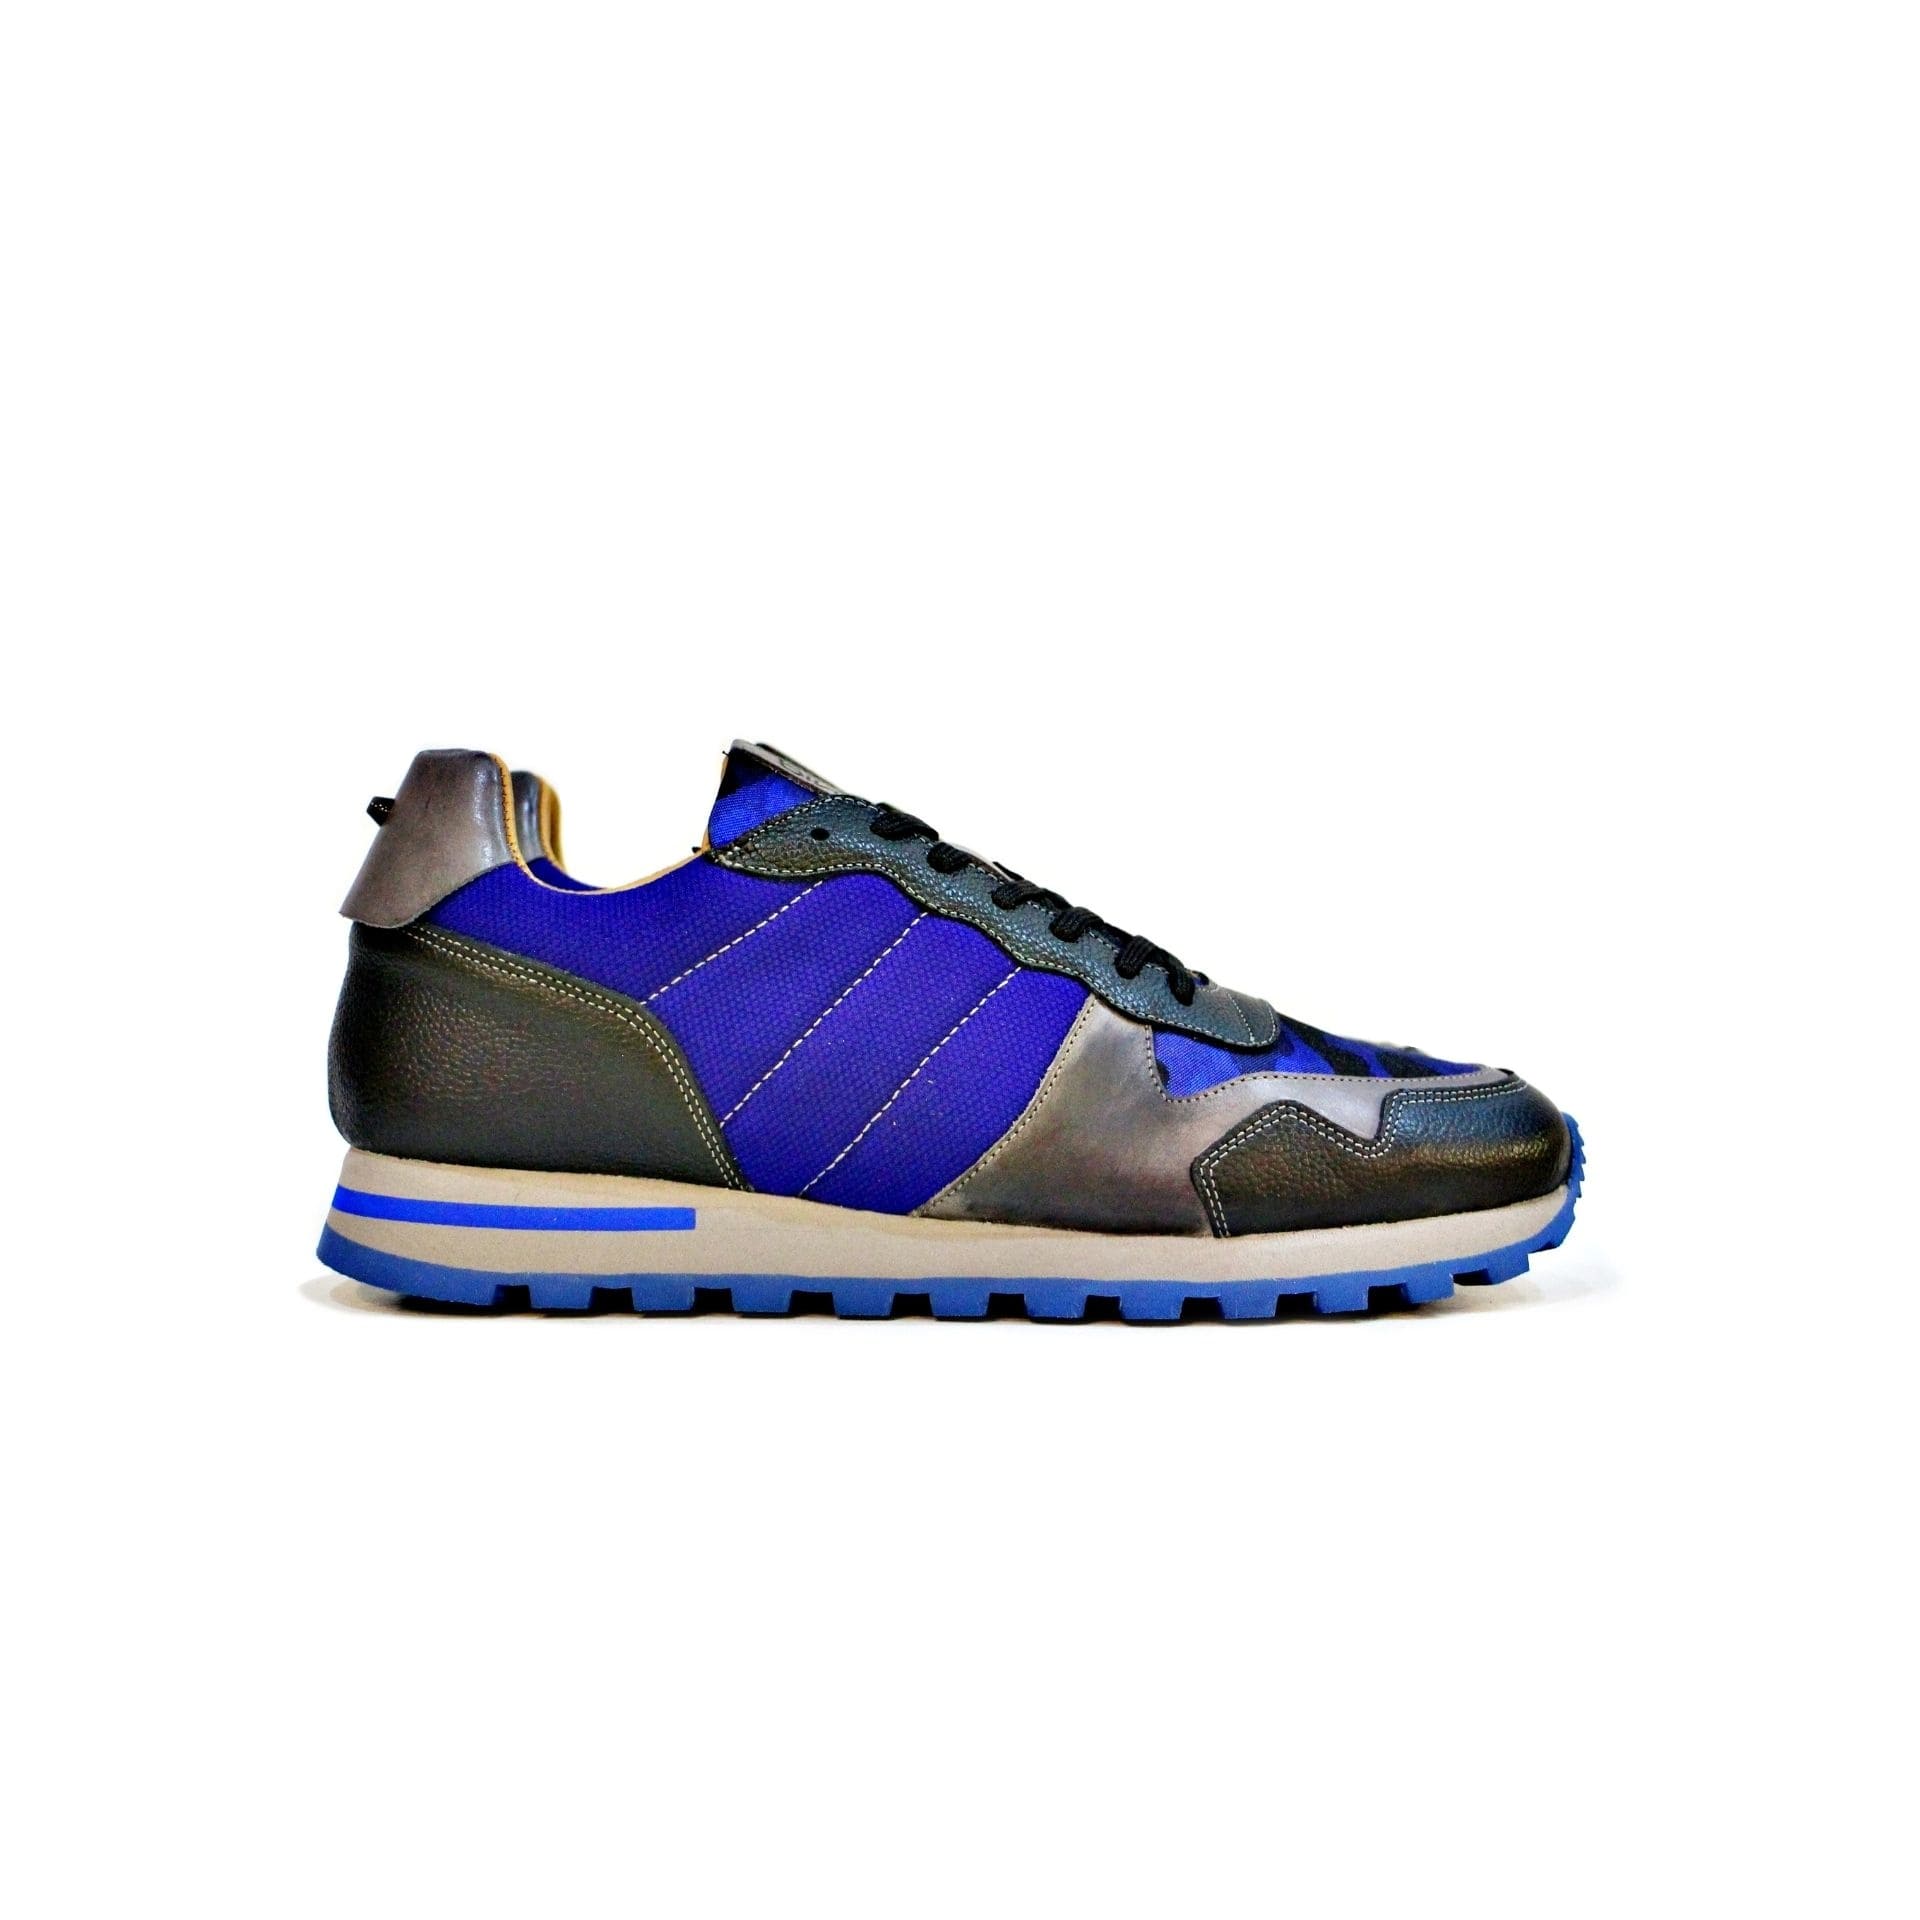 Sneaker omposed by leather, fabric, with micro sole. “Walk with Pintta”